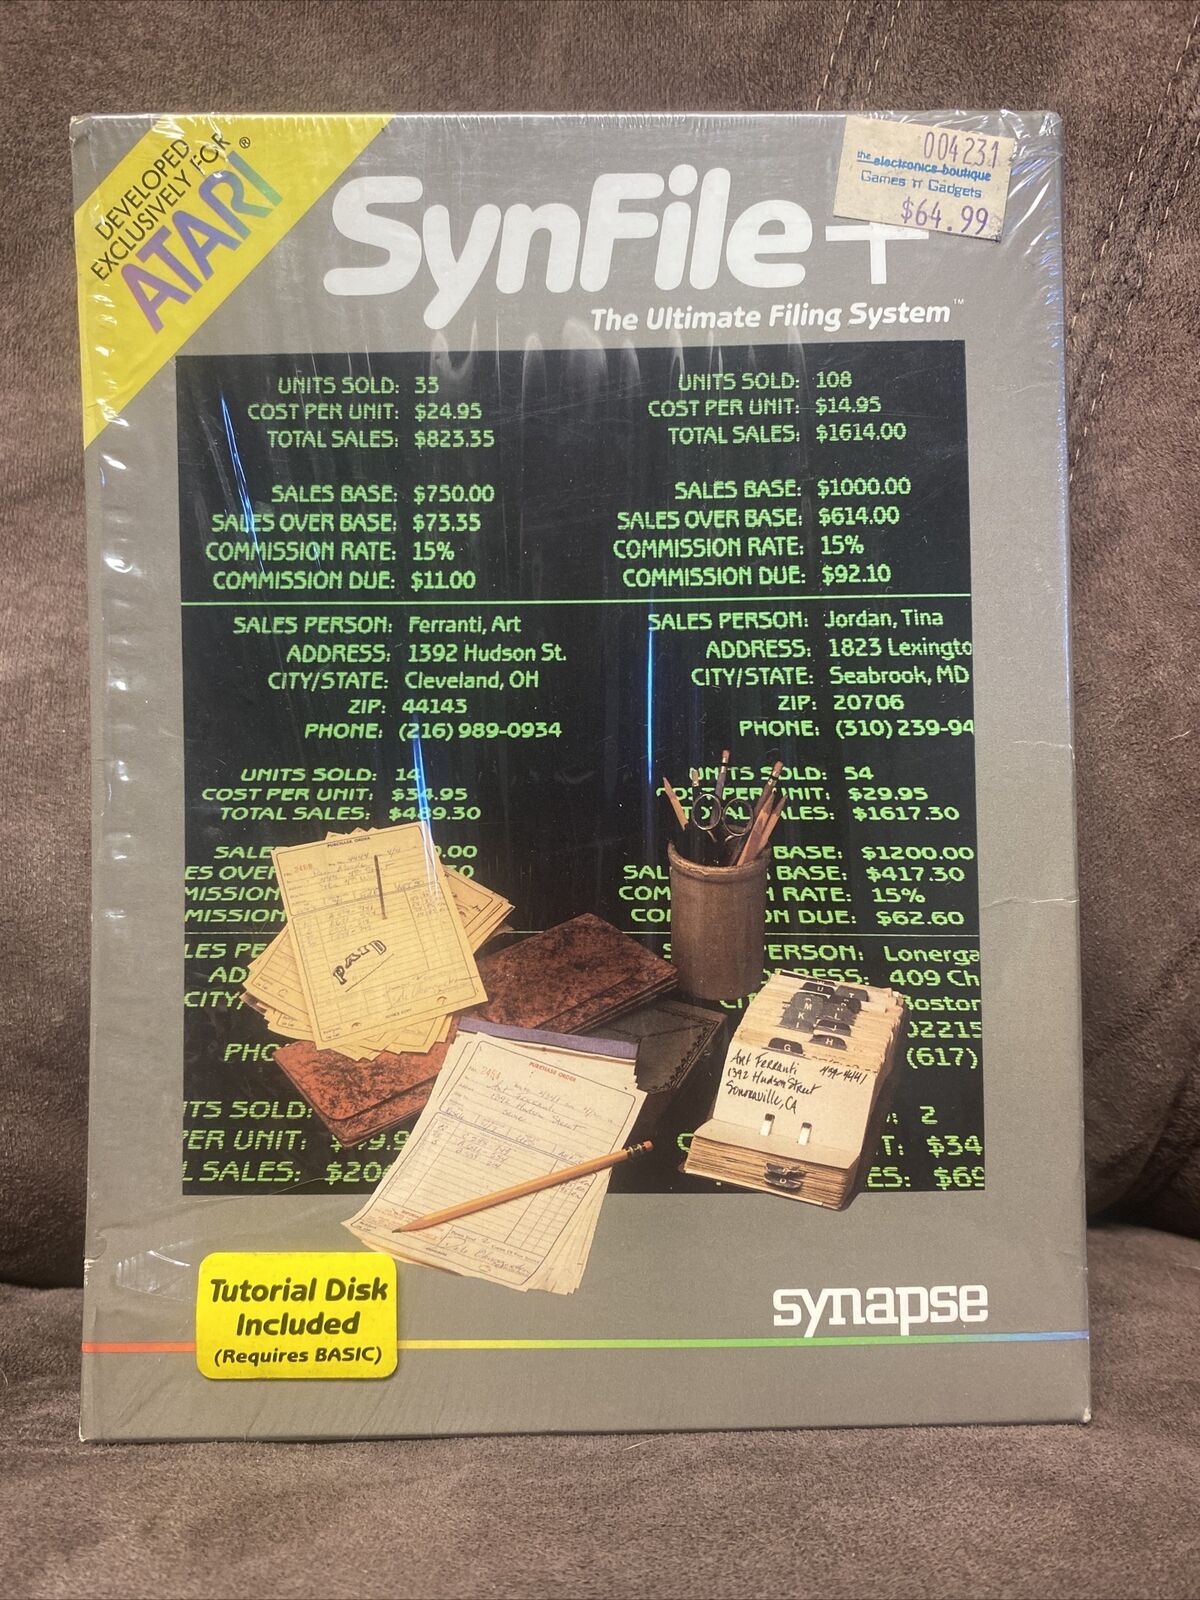 SynFile+ Ultimate Filing System (Atari 400 800 XL XE, 1983) | Synapse